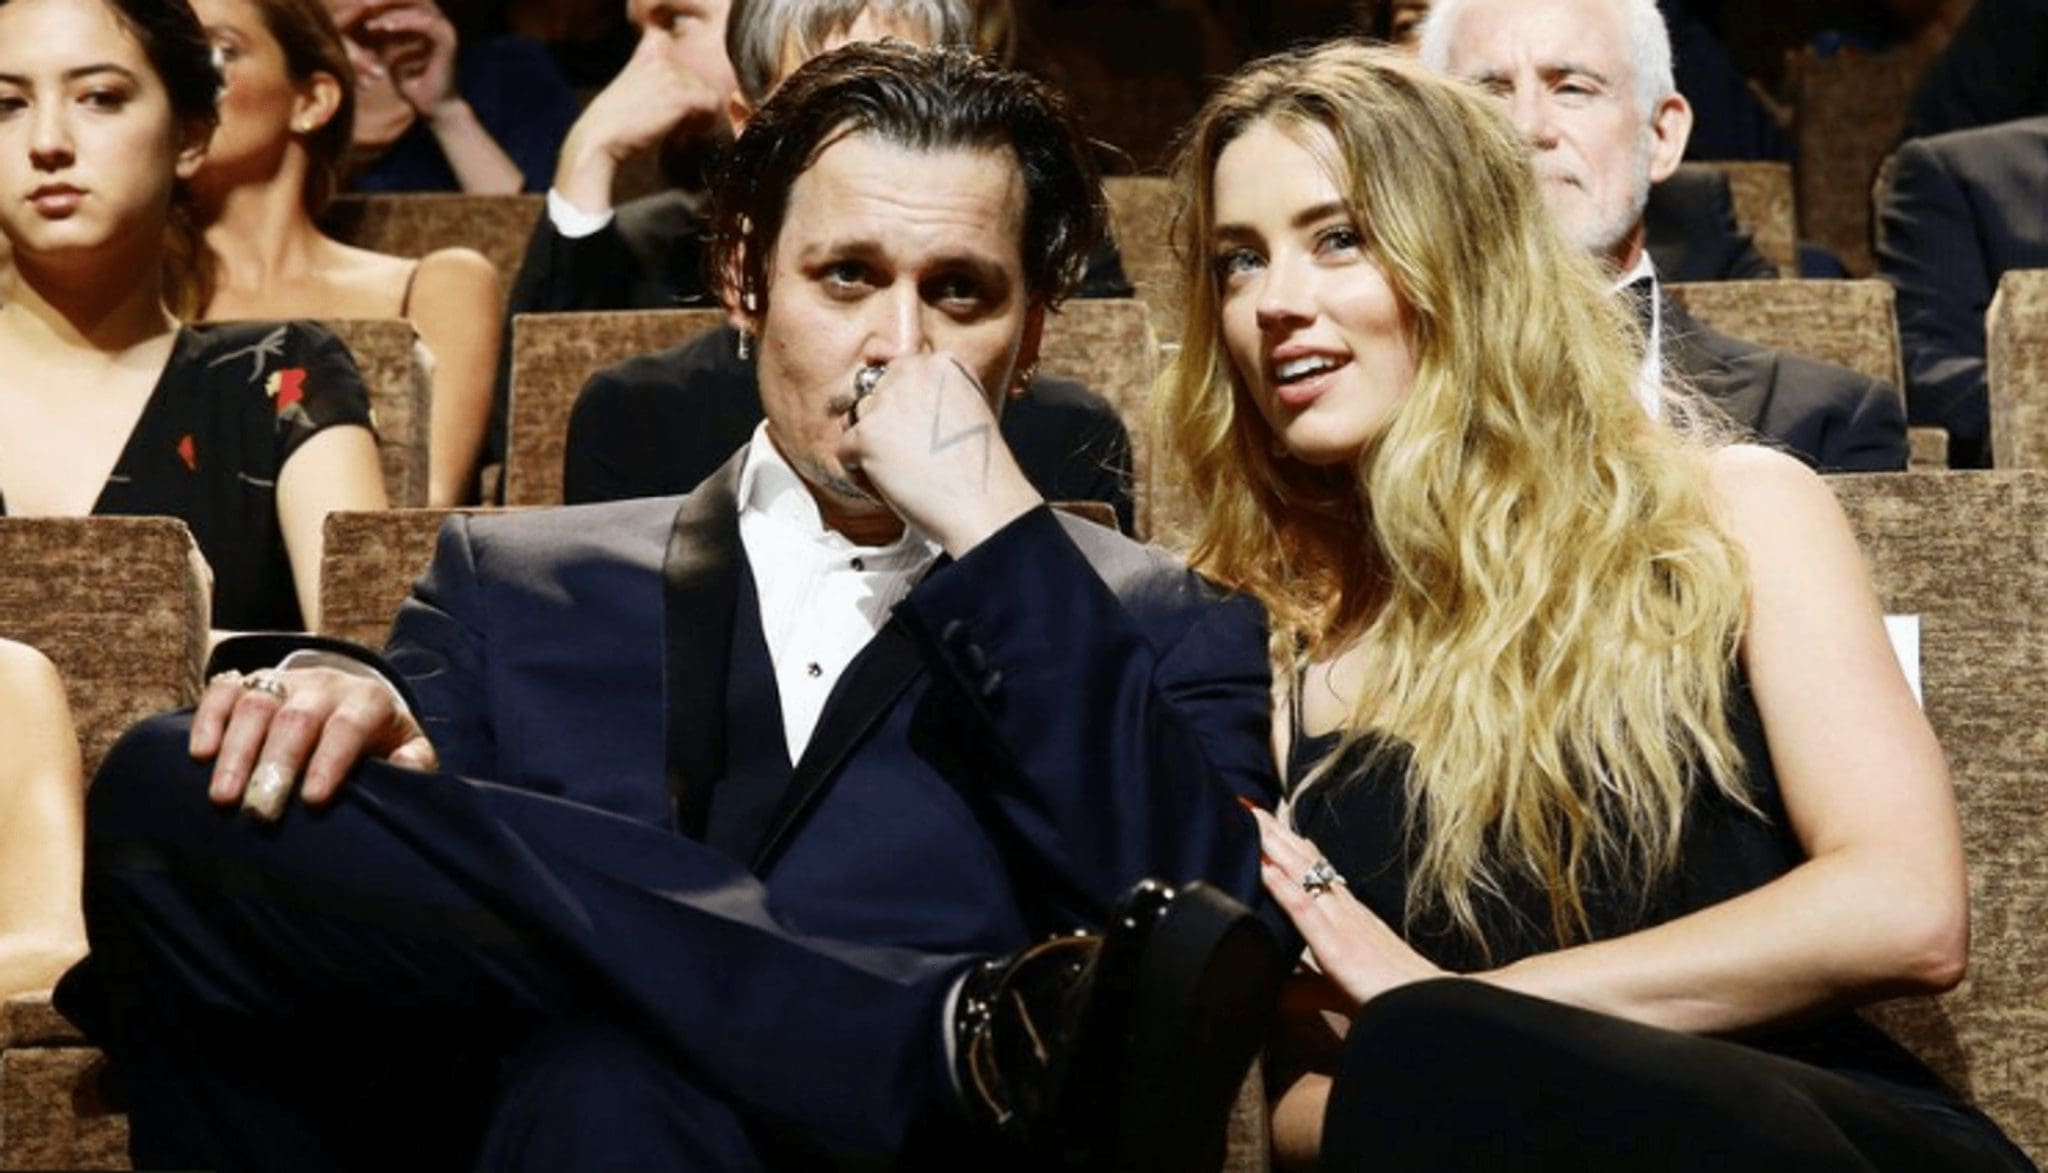 Amber Heard speaks out about Johnny Depp's exes